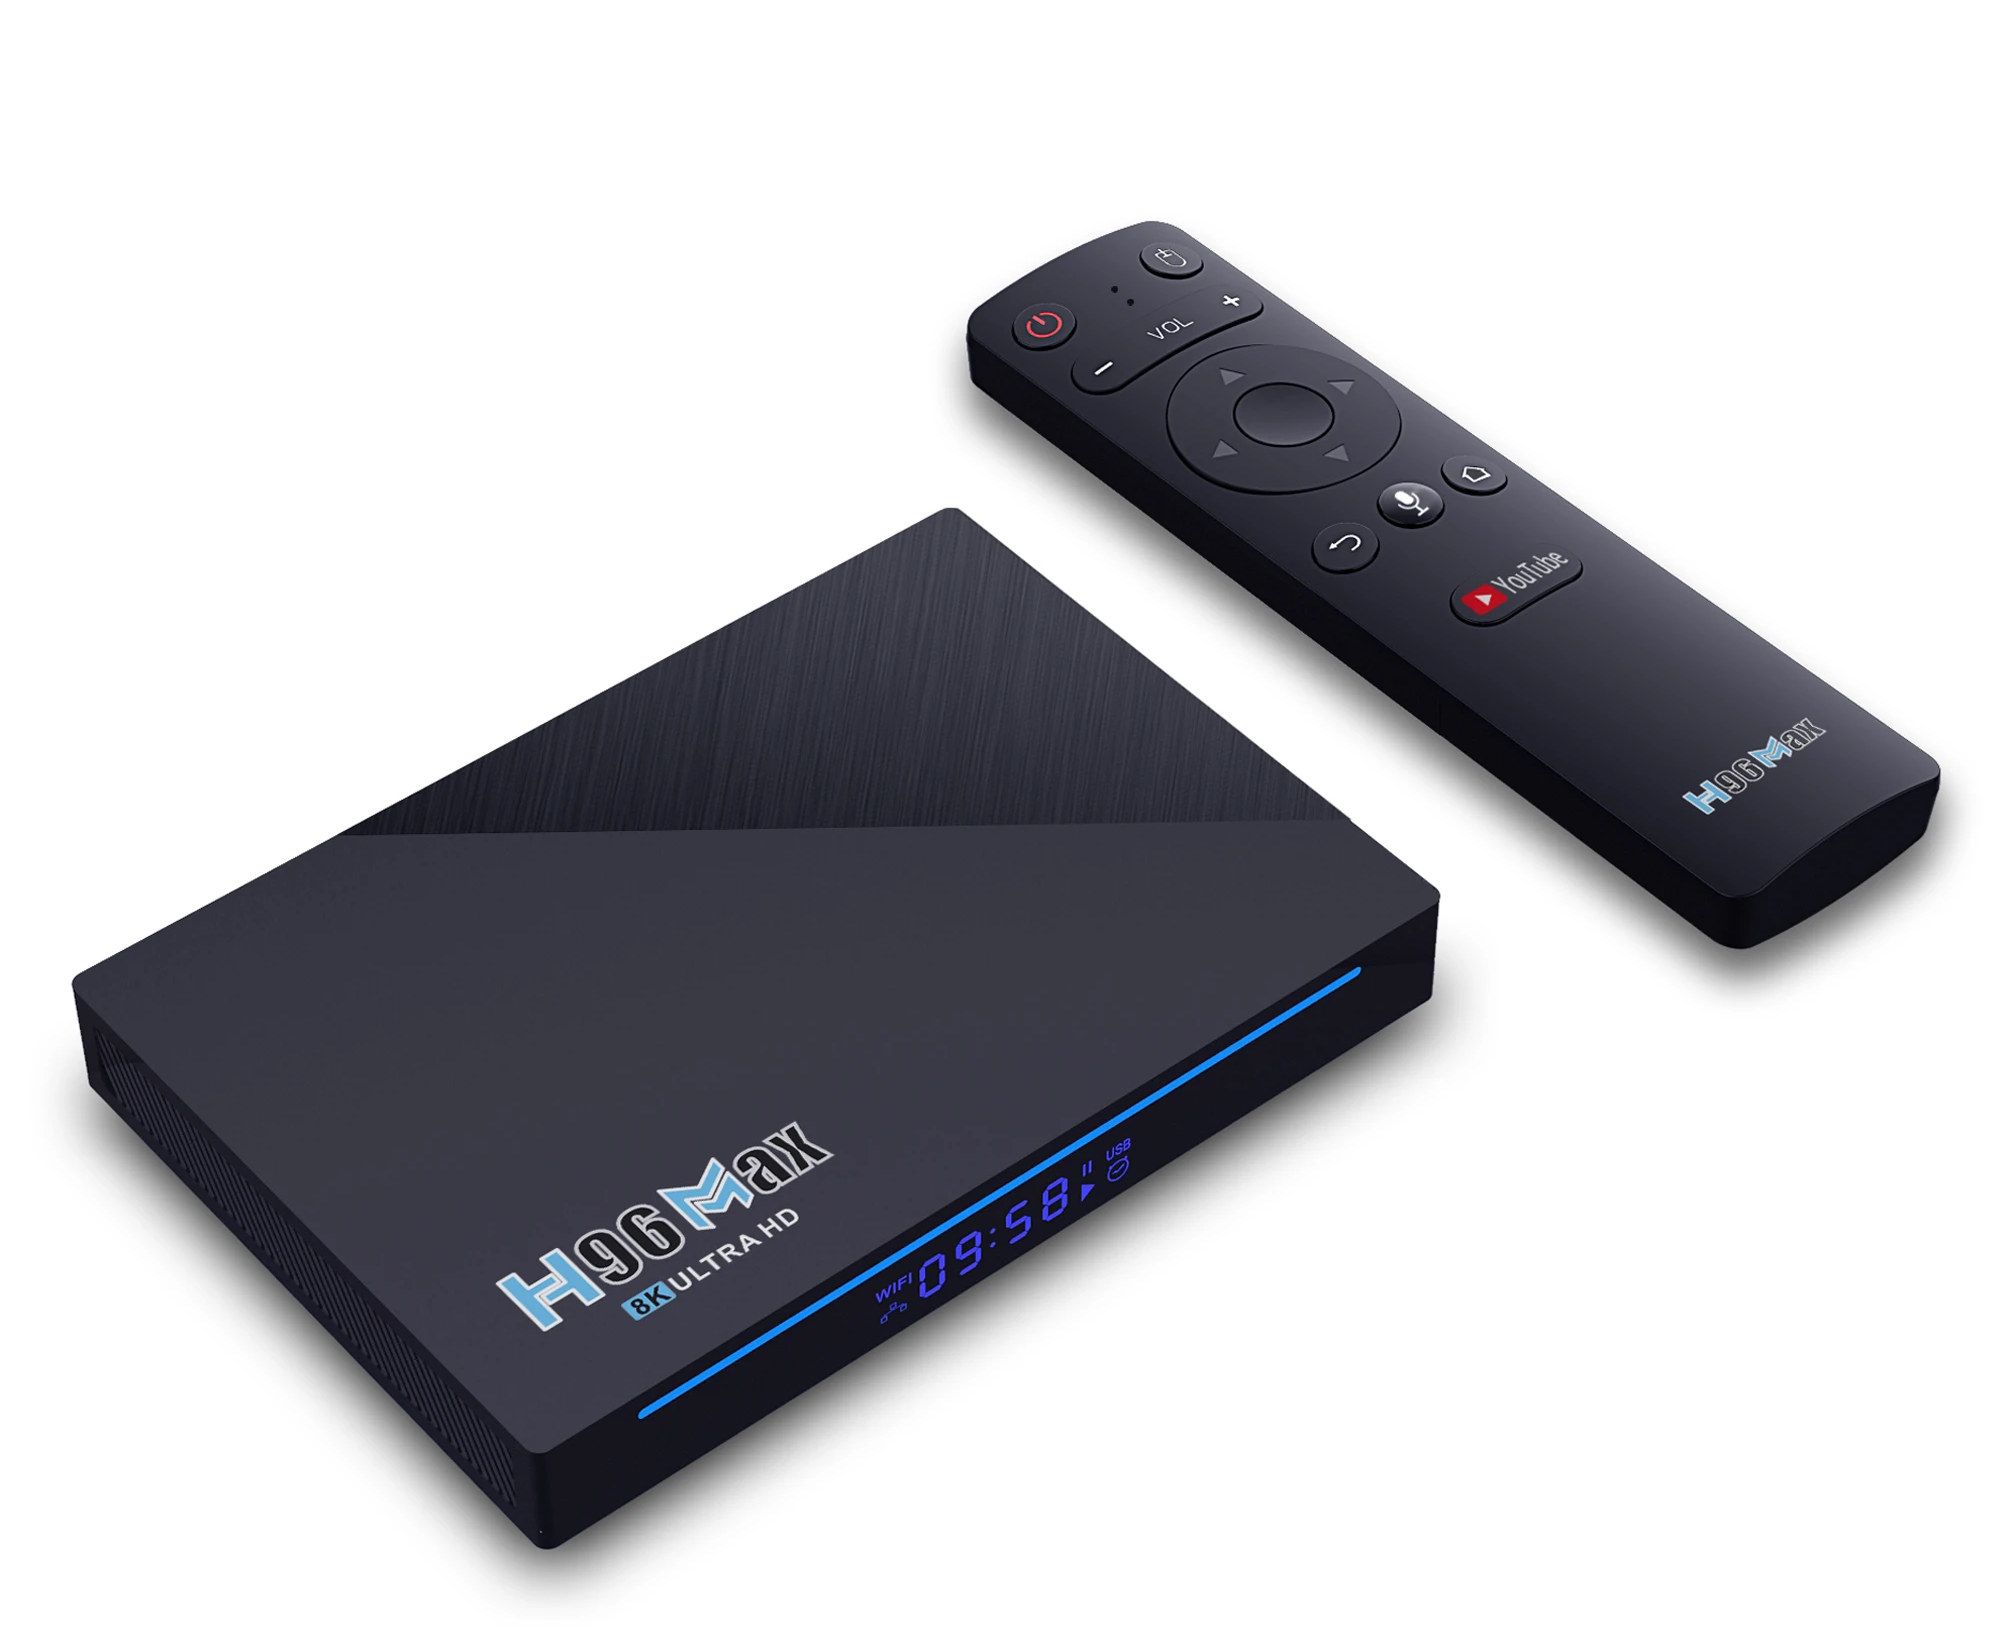 H96 MAX RK3566 Tv Box Review - New Upgrade or Just Design Change